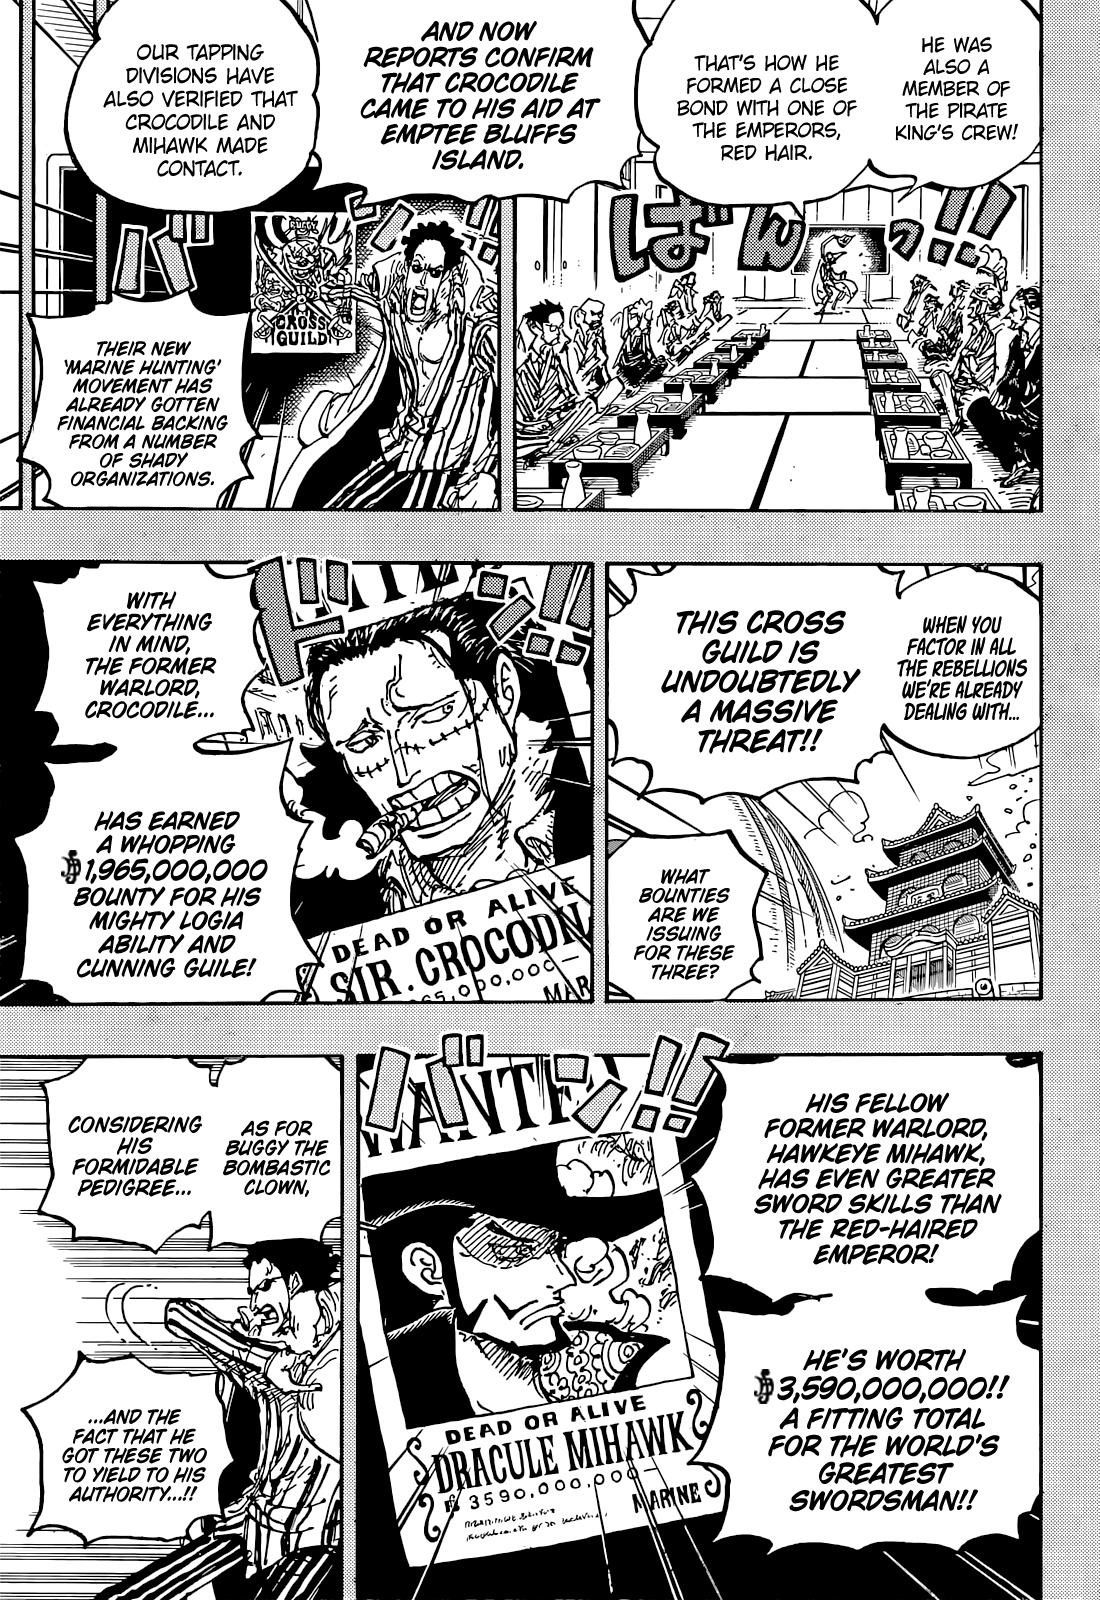 What is the point of bounties in One Piece world if the bounties